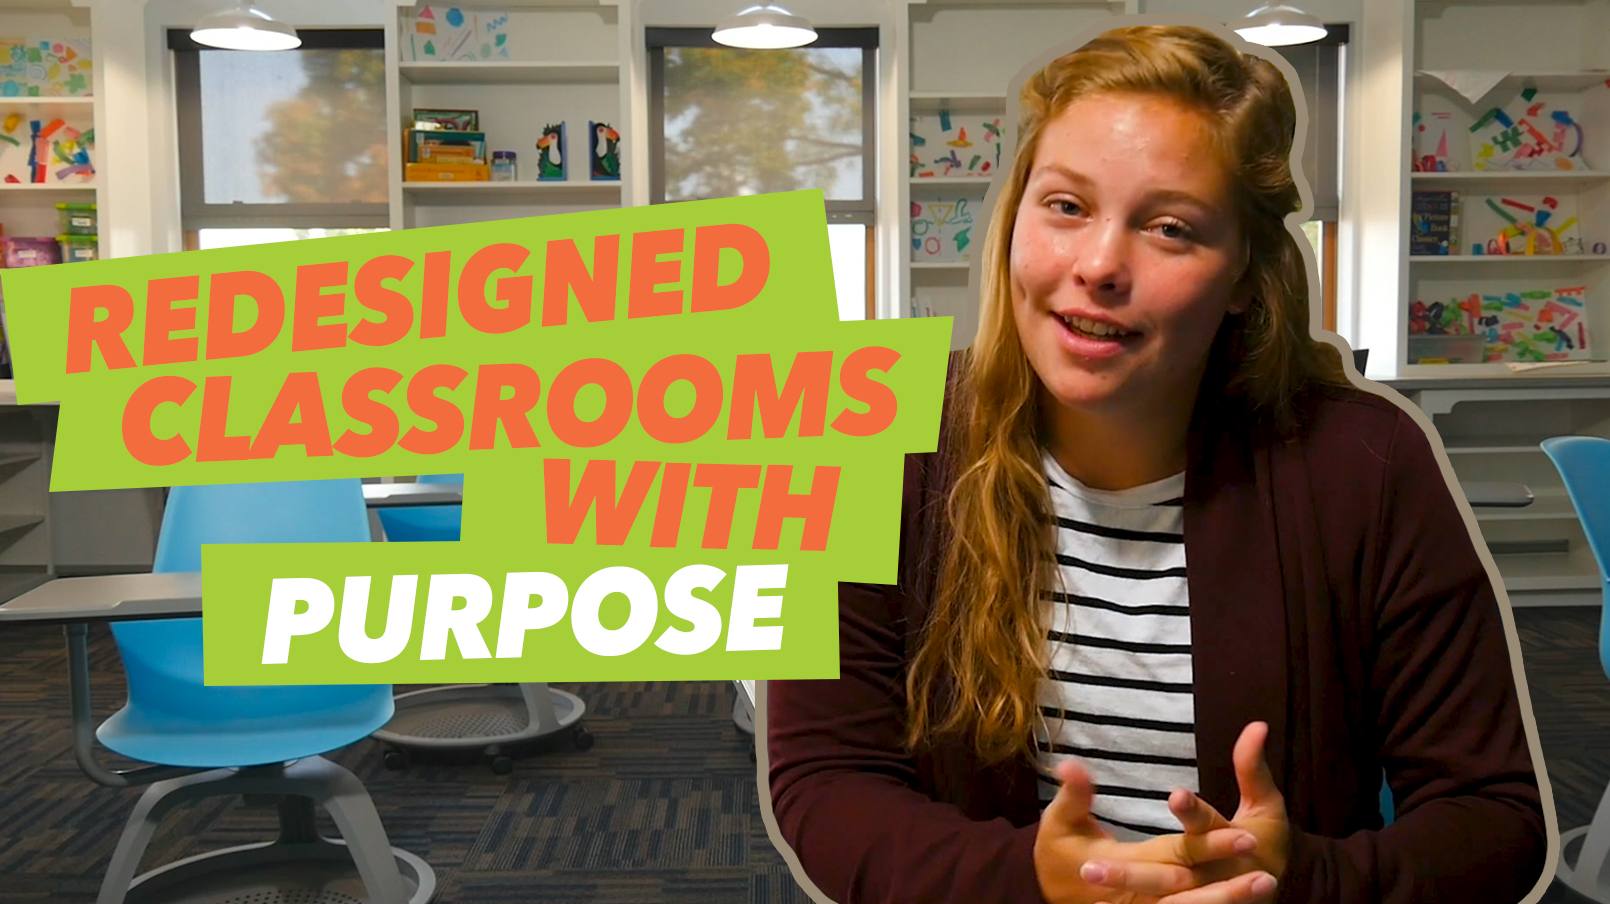 Classrooms with a purpose video